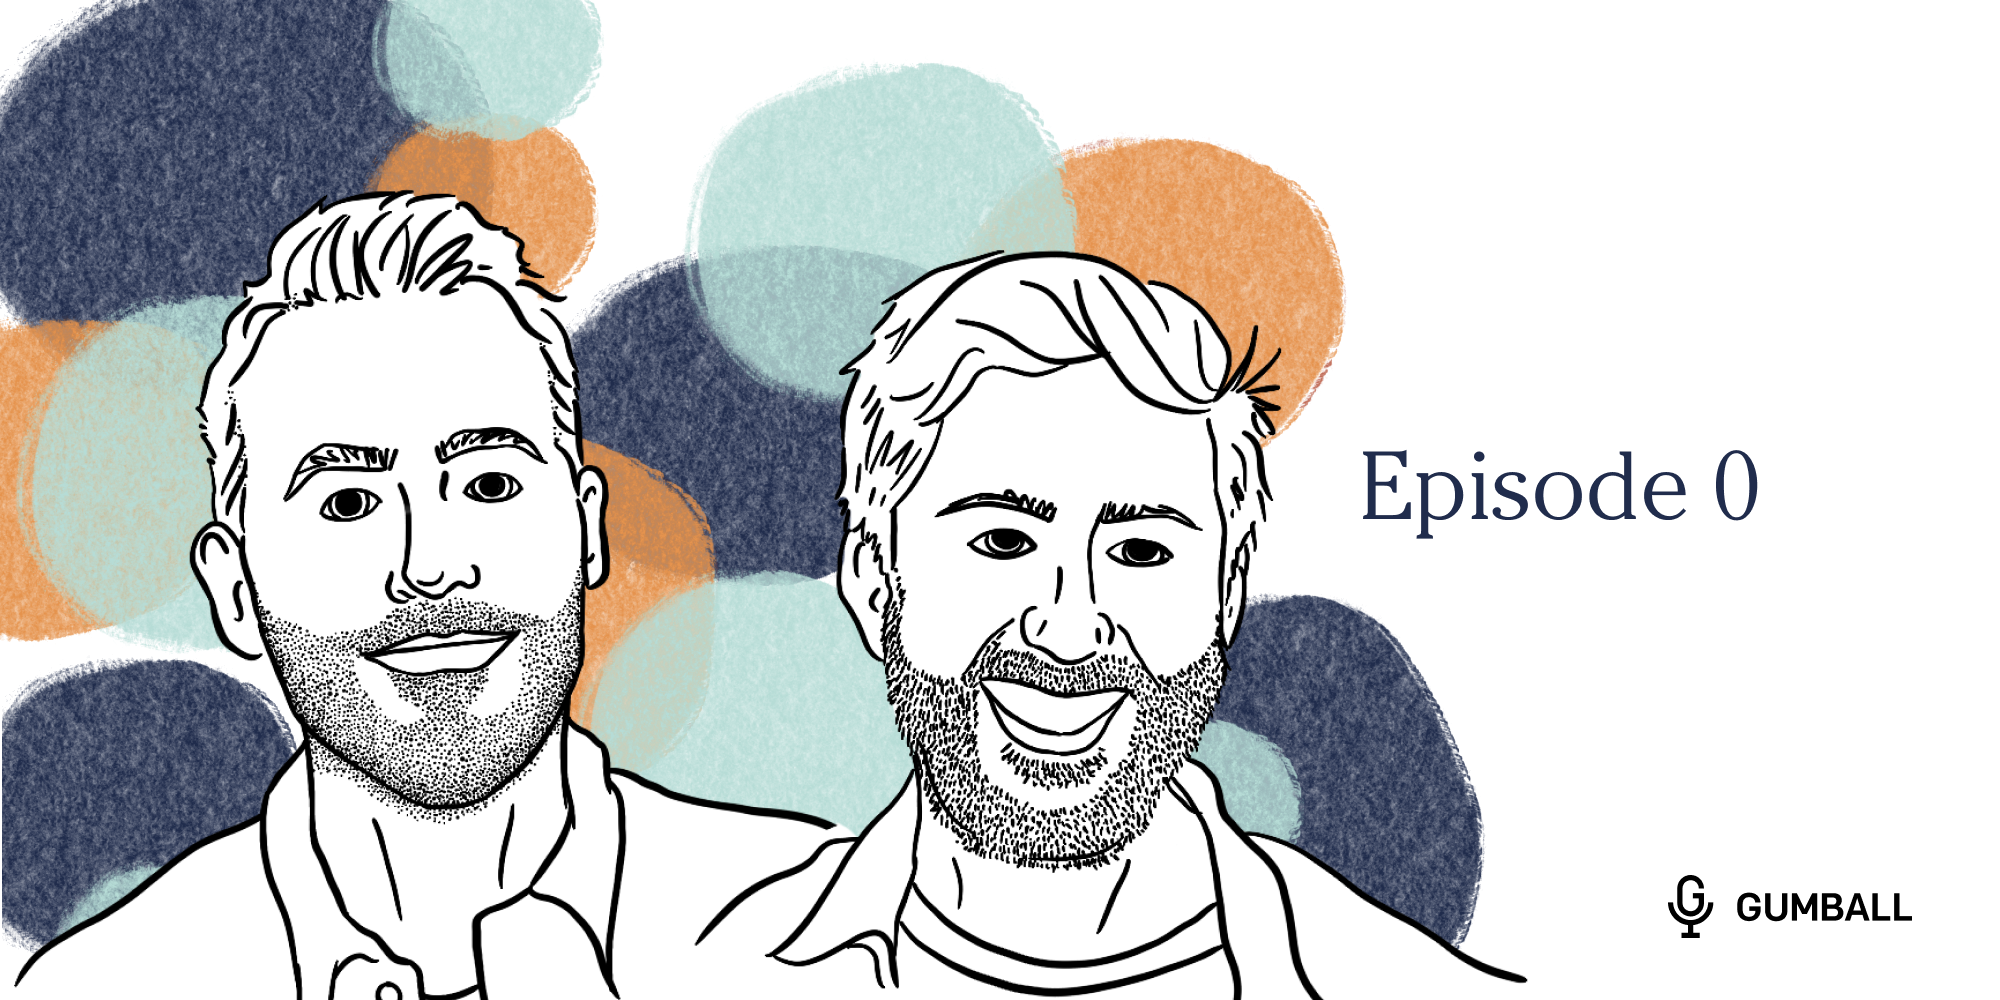 illustrated versions of jake hurwitz on the left and amir blumenfeld on the right with the text episode 0 next to their head